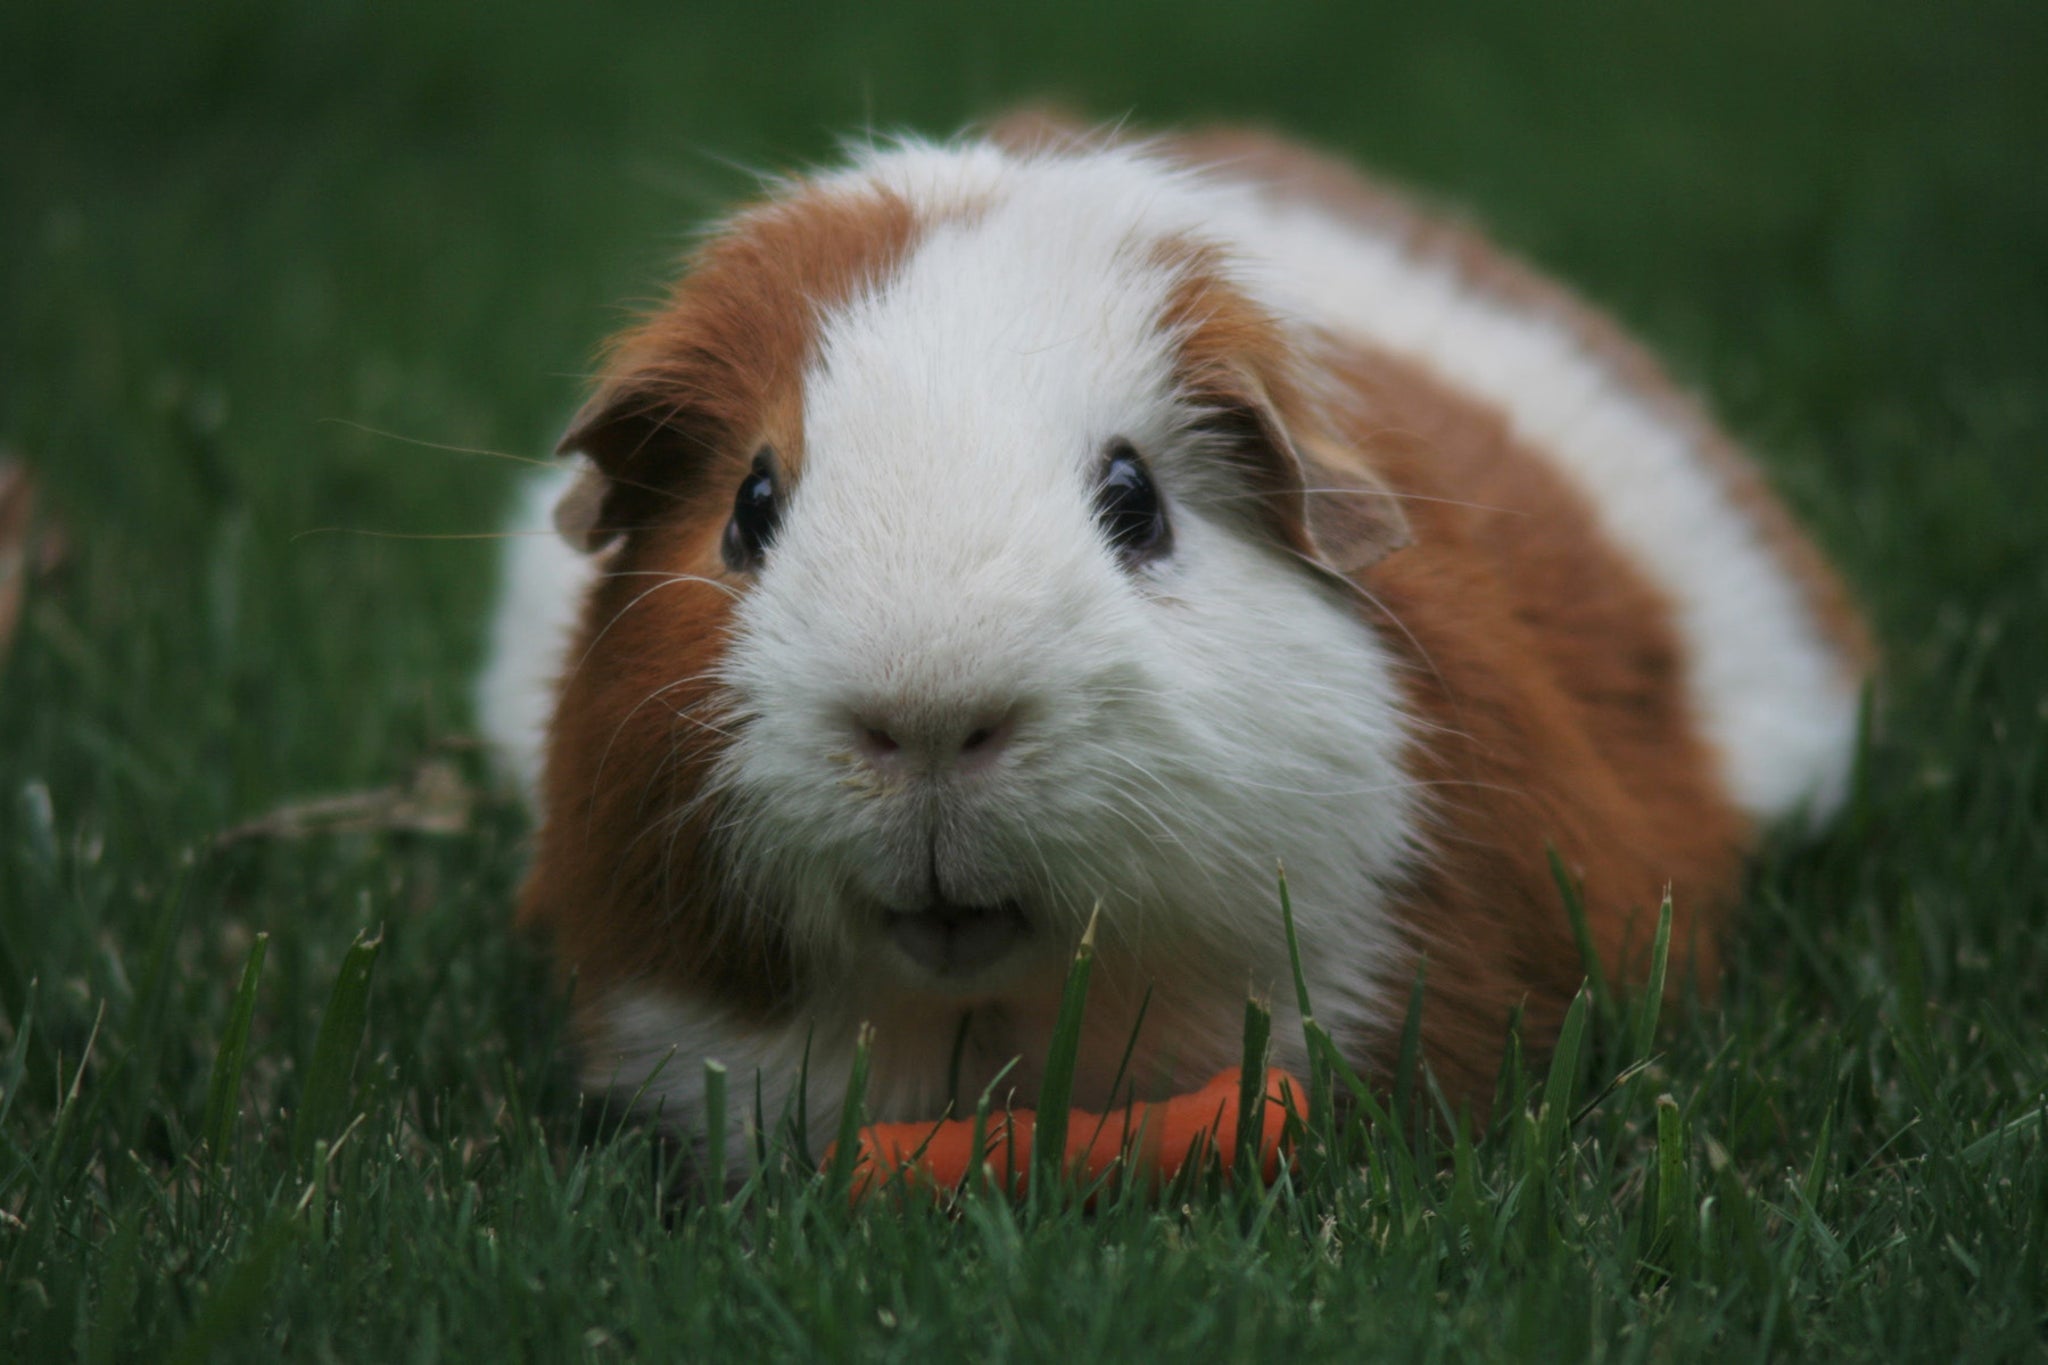 Smaller mammals like guinea pigs may be a better alternative for your family with allergies if they stay in a cage.